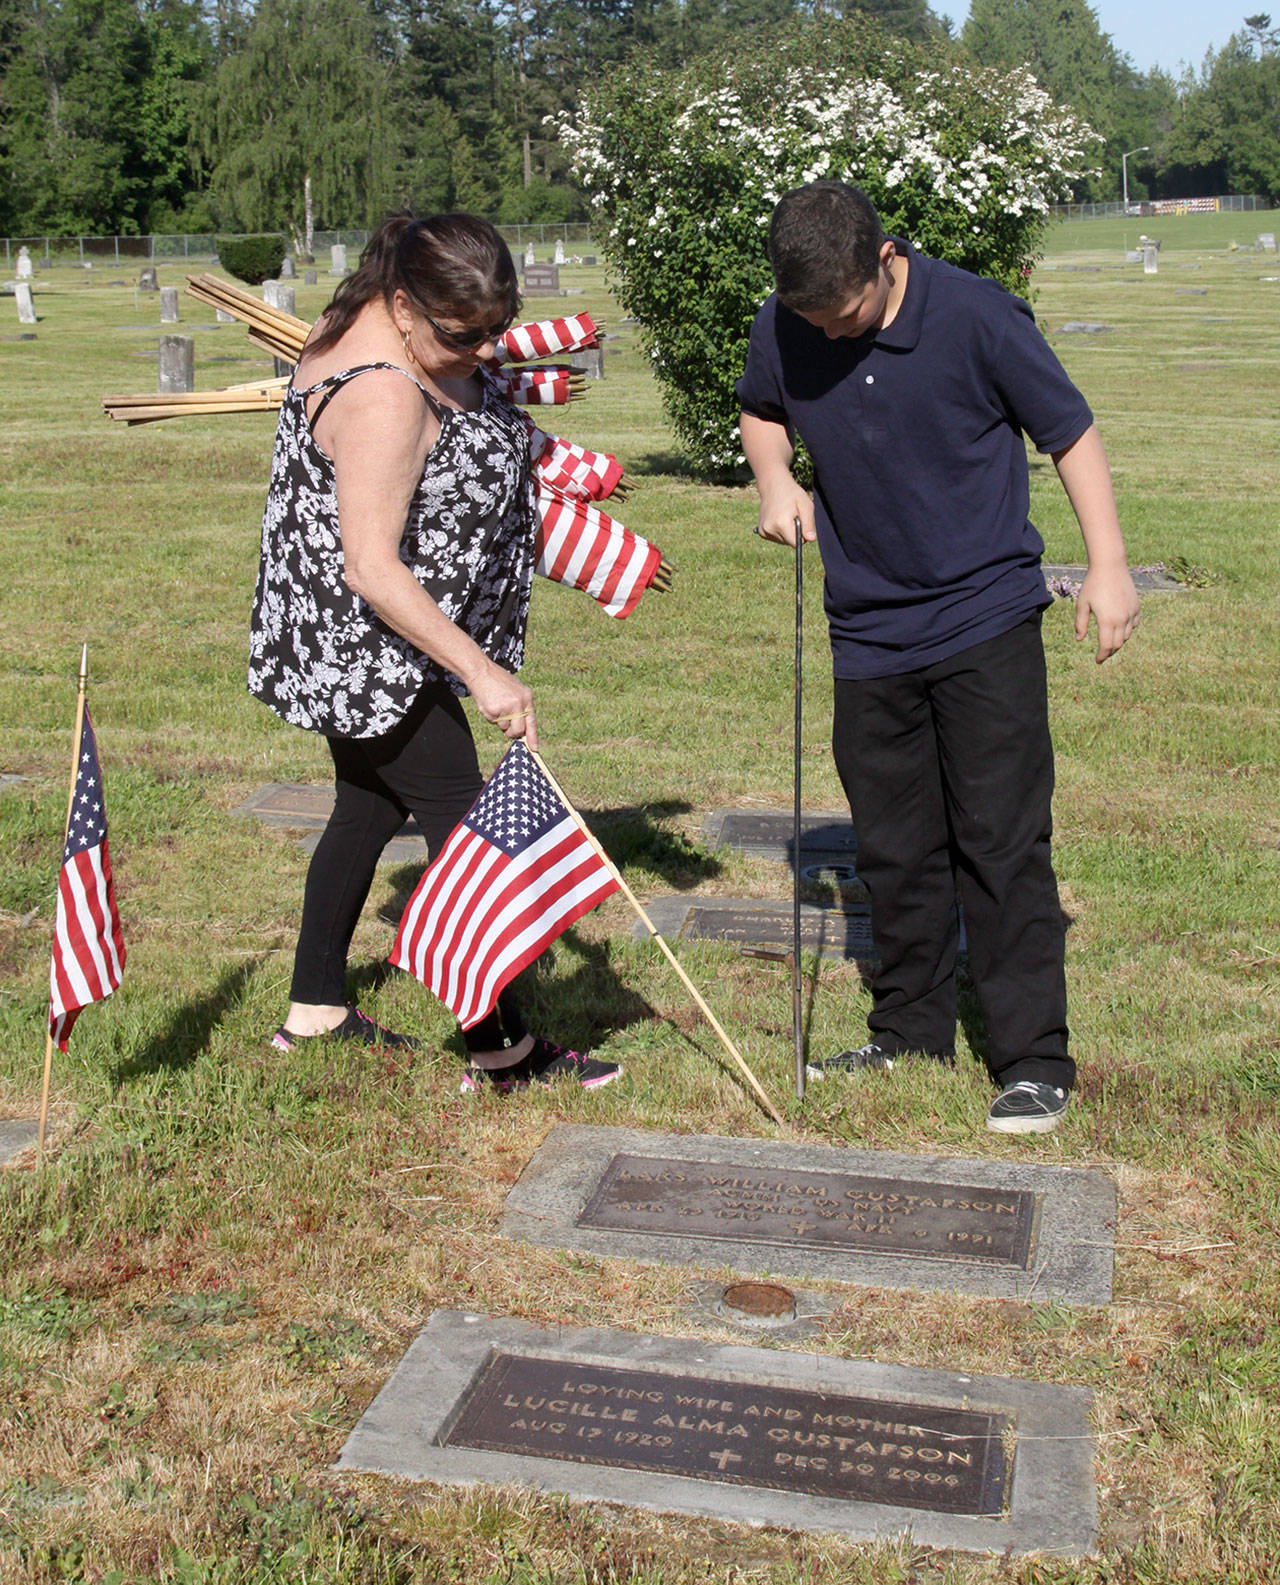 Linda Uhlig and her grandson Jason Kibe, 13, of Port Angeles place an American flag near the grave of a fallen military hero at Ocean View Cemetery in Port Angeles. (Dave Logan/for Peninsula Daily News)